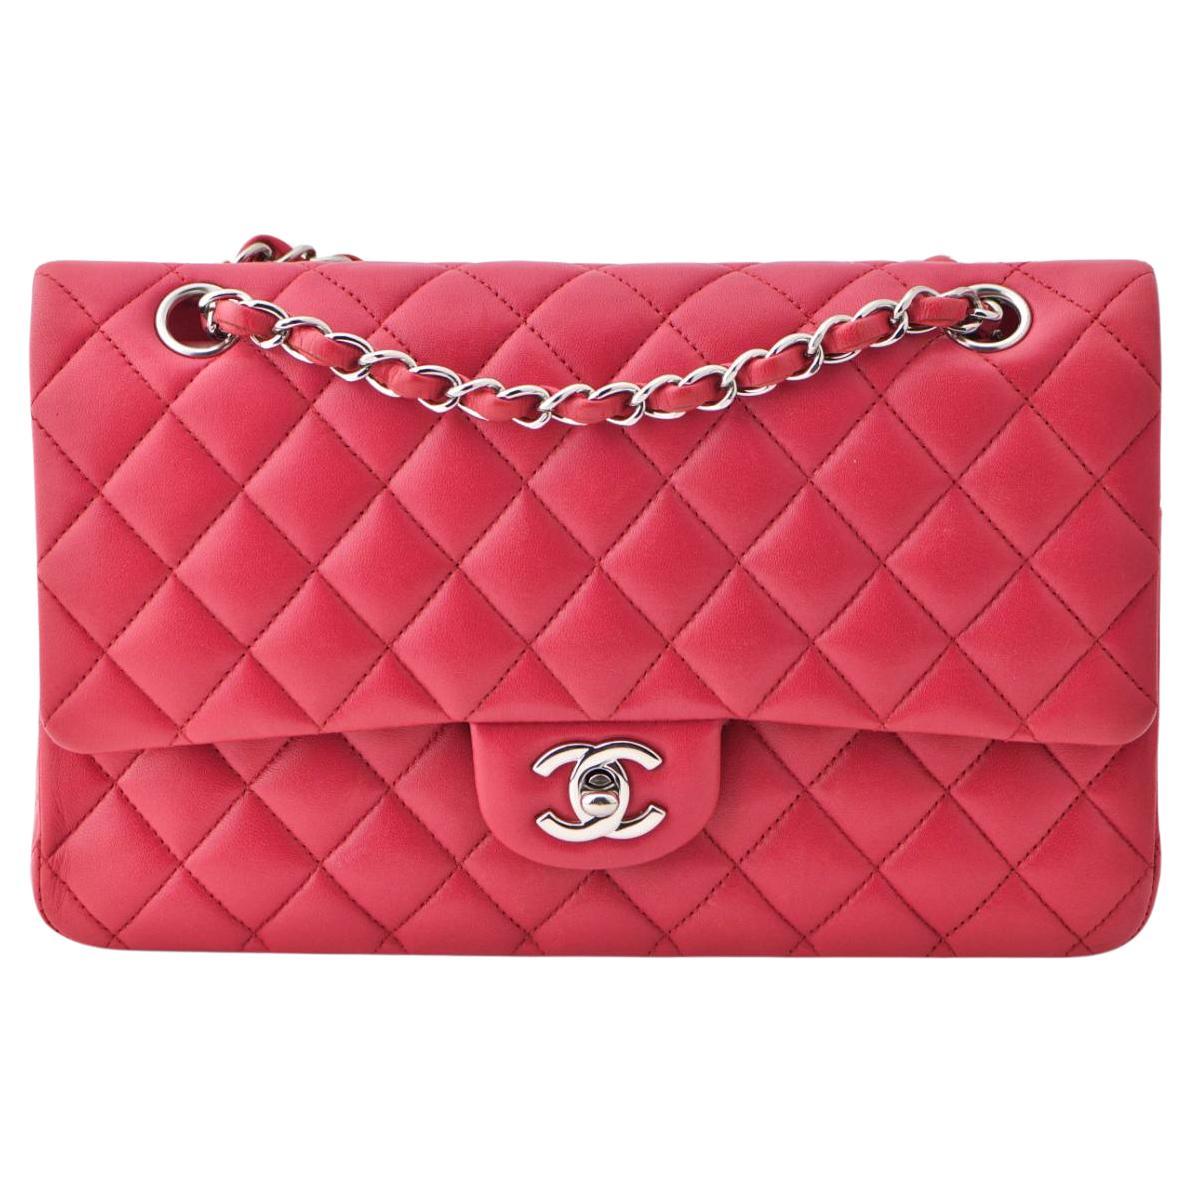 CHANEL Pinkish Red Quilted Lambskin Timeless Classic Medium Double Flap Bag